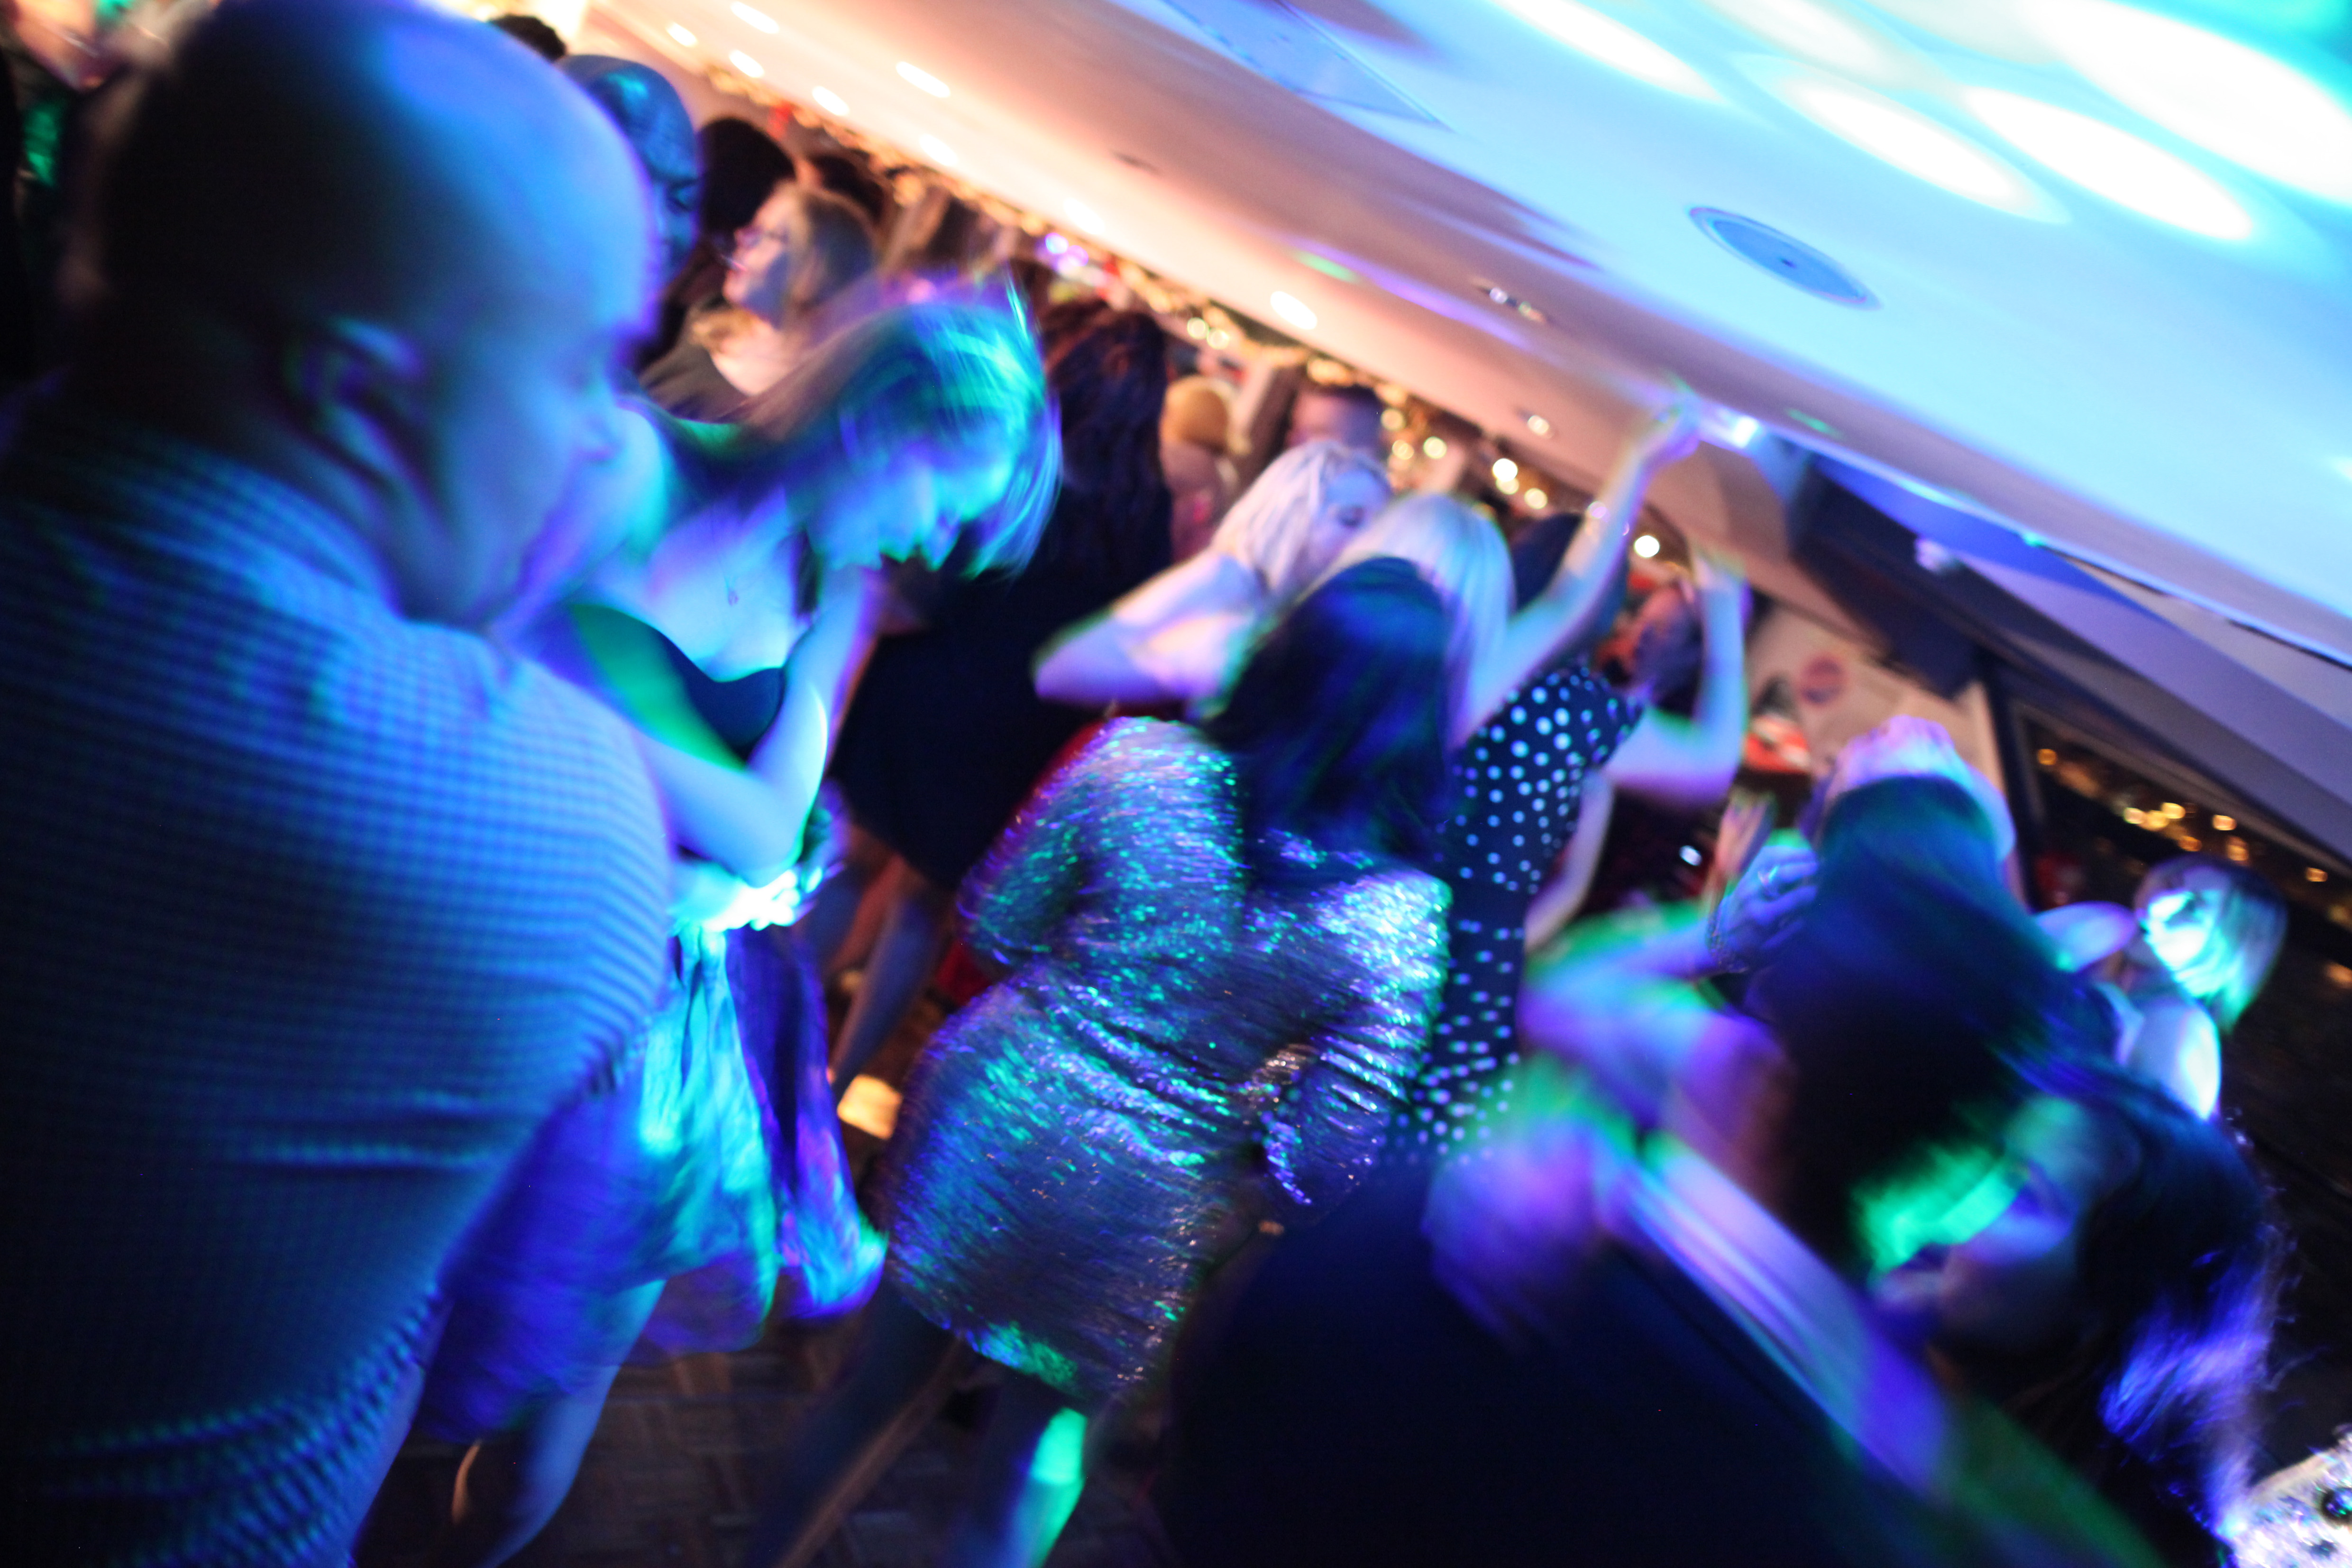 Dance to a top Thames DJ on the Xmas Thames Party Cruise